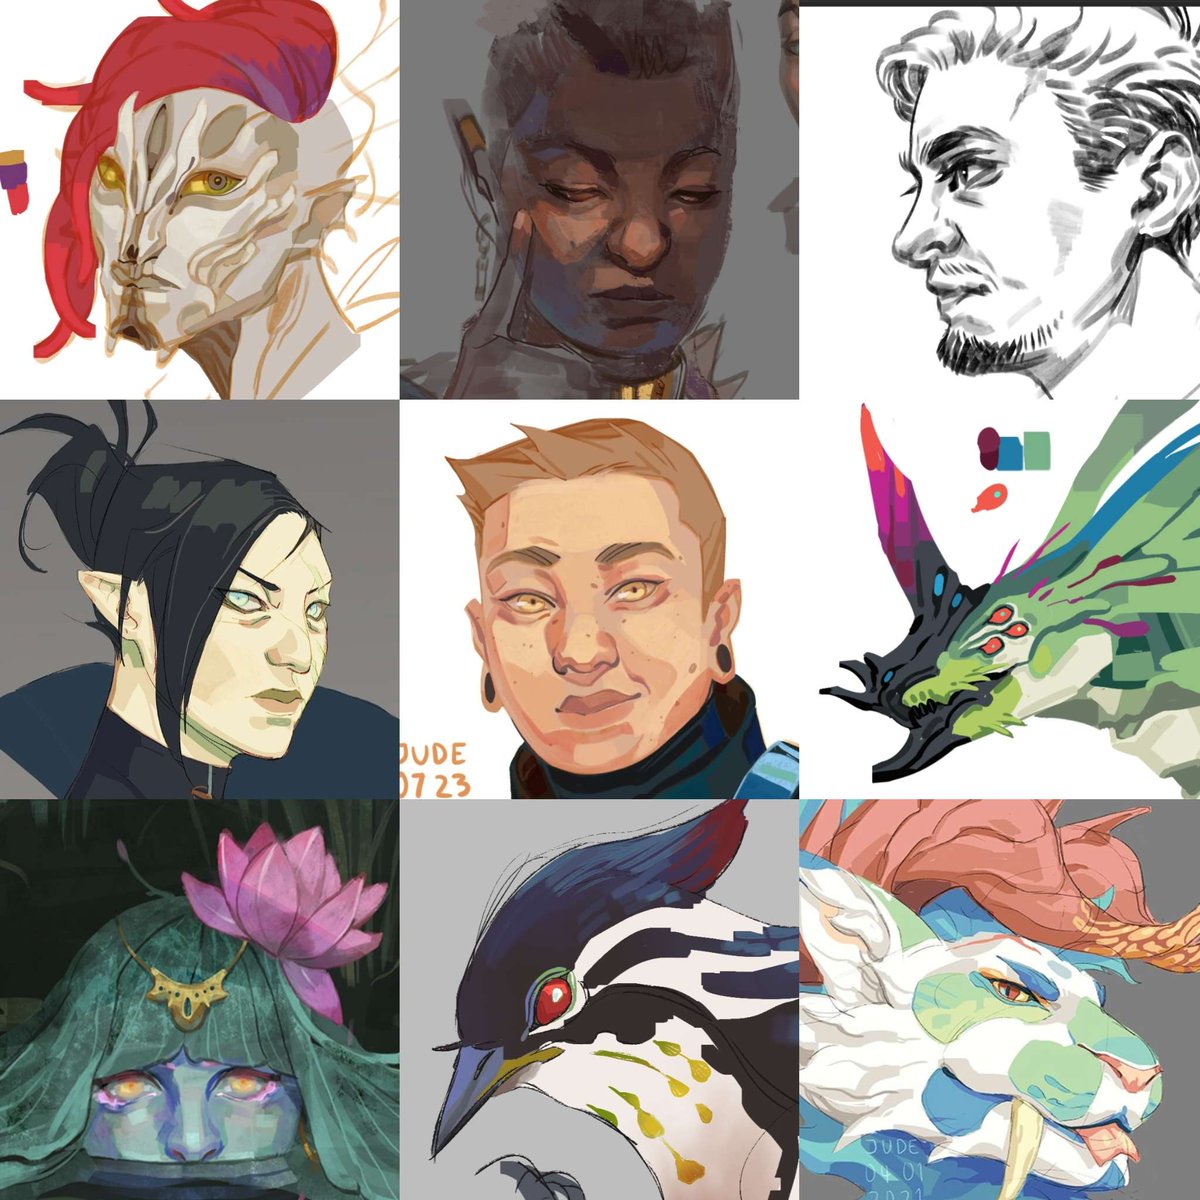 Face train! Tried to choose a variety, though i don't have much that's super recent. not going to tag anybody, i'm way too anxious for that, but continue if you'd like!